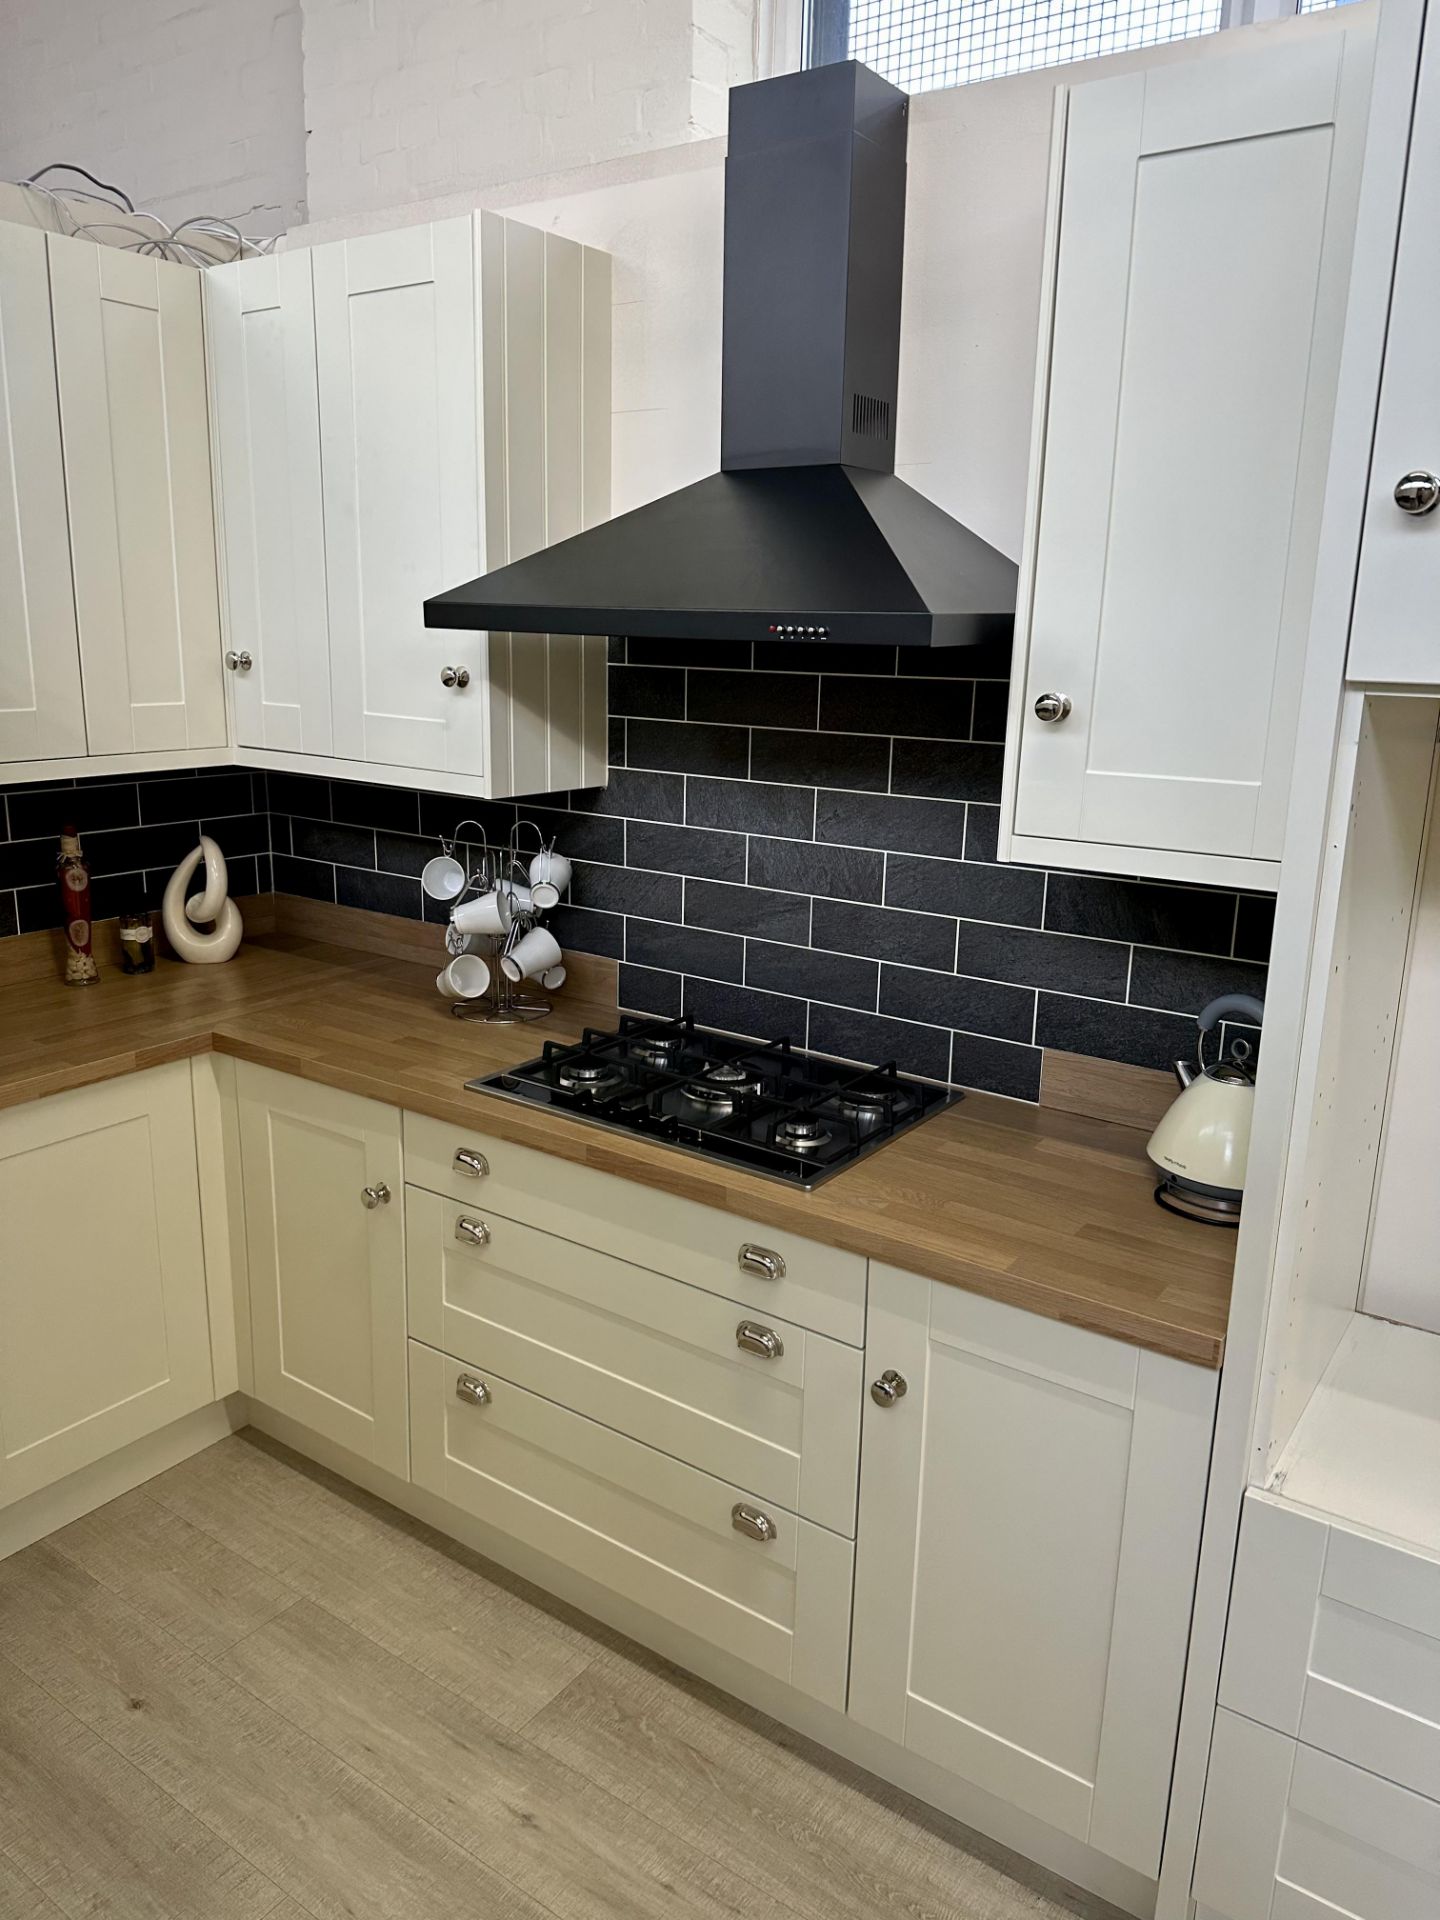 Omega English Rose Kitchen Display w/ Hob, Extractor, Sink & Tap - RRP£11,866 - See Pics & Desc - Image 6 of 25